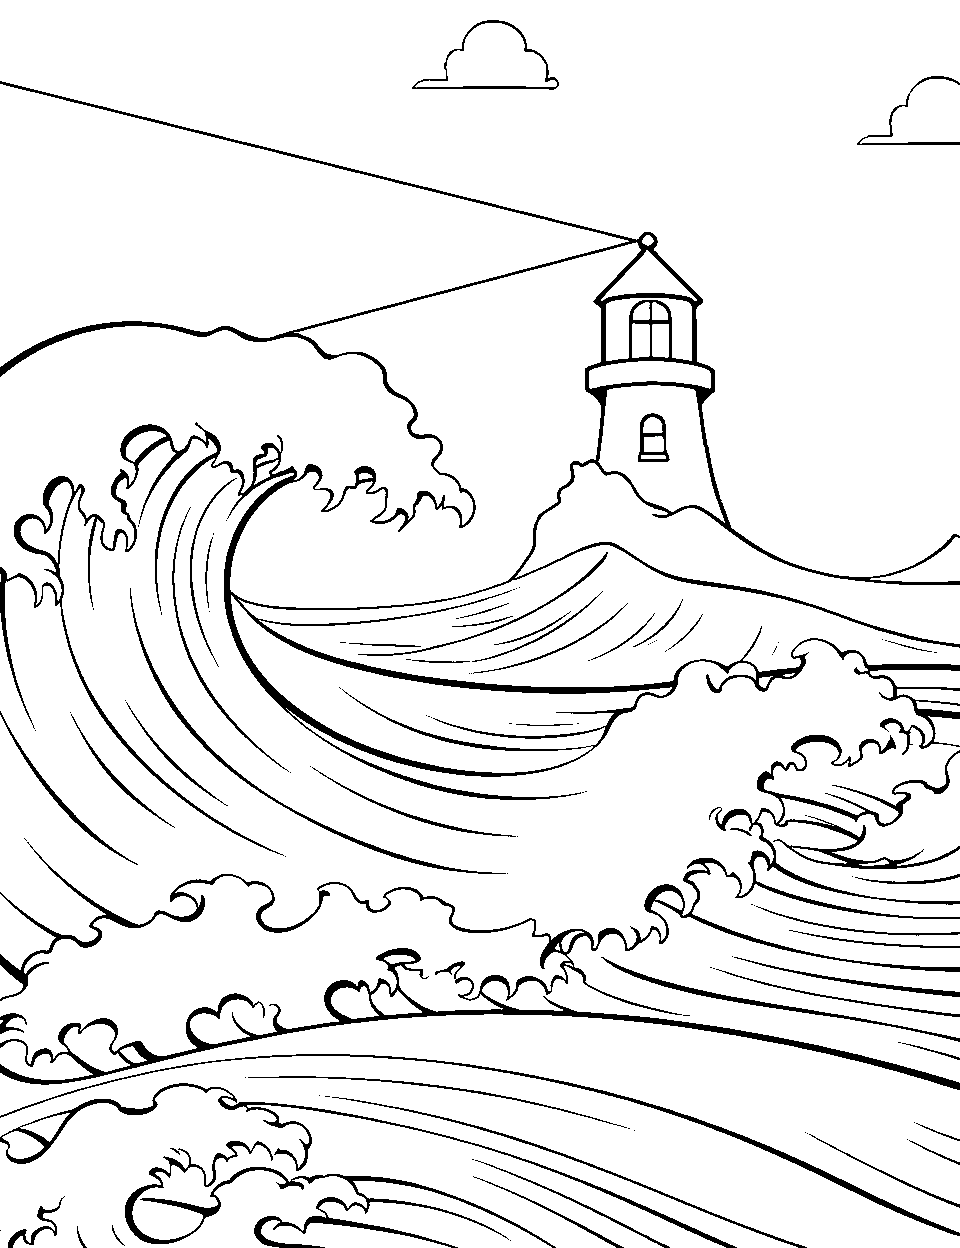 Lighthouse Love Coloring Page - A lighthouse with waves crashing around.